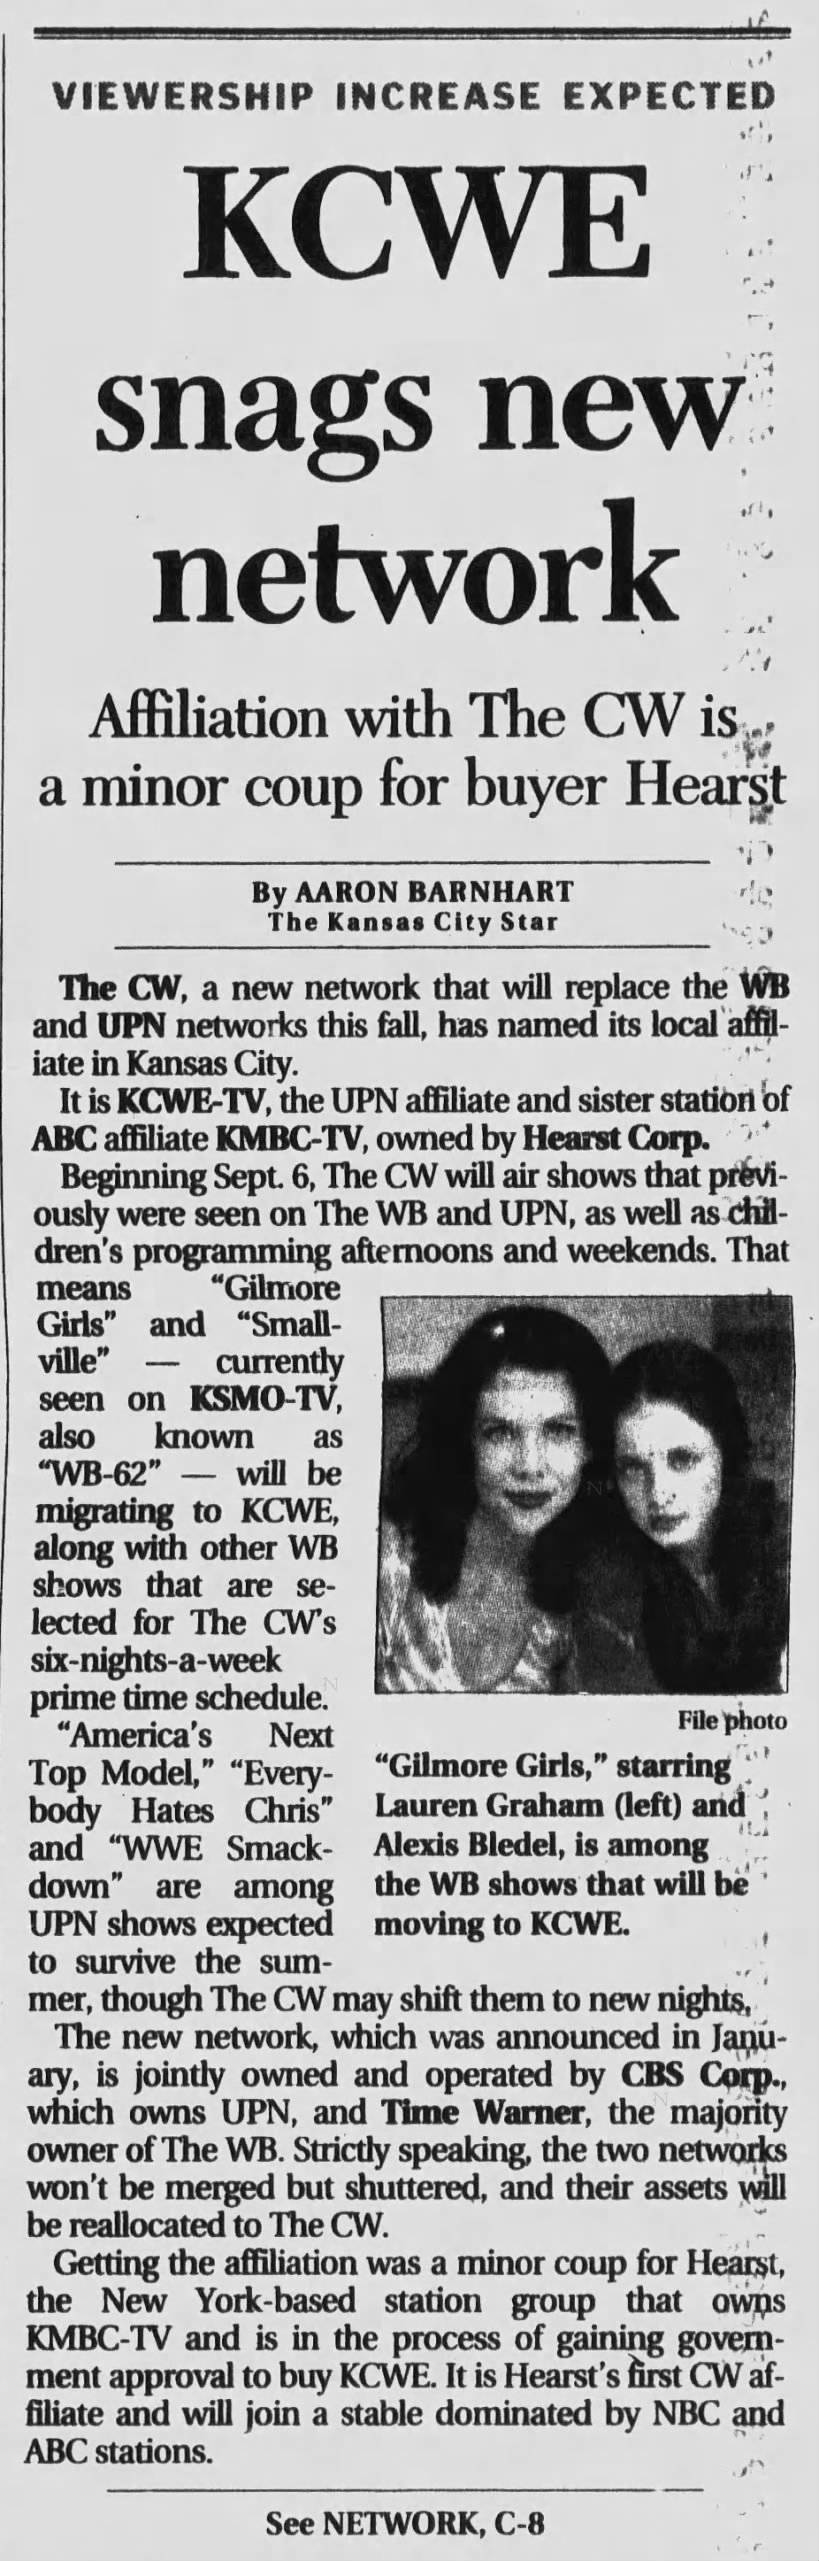 KCWE snags new network: Affiliation with The CW is a minor coup for buyer Hearst